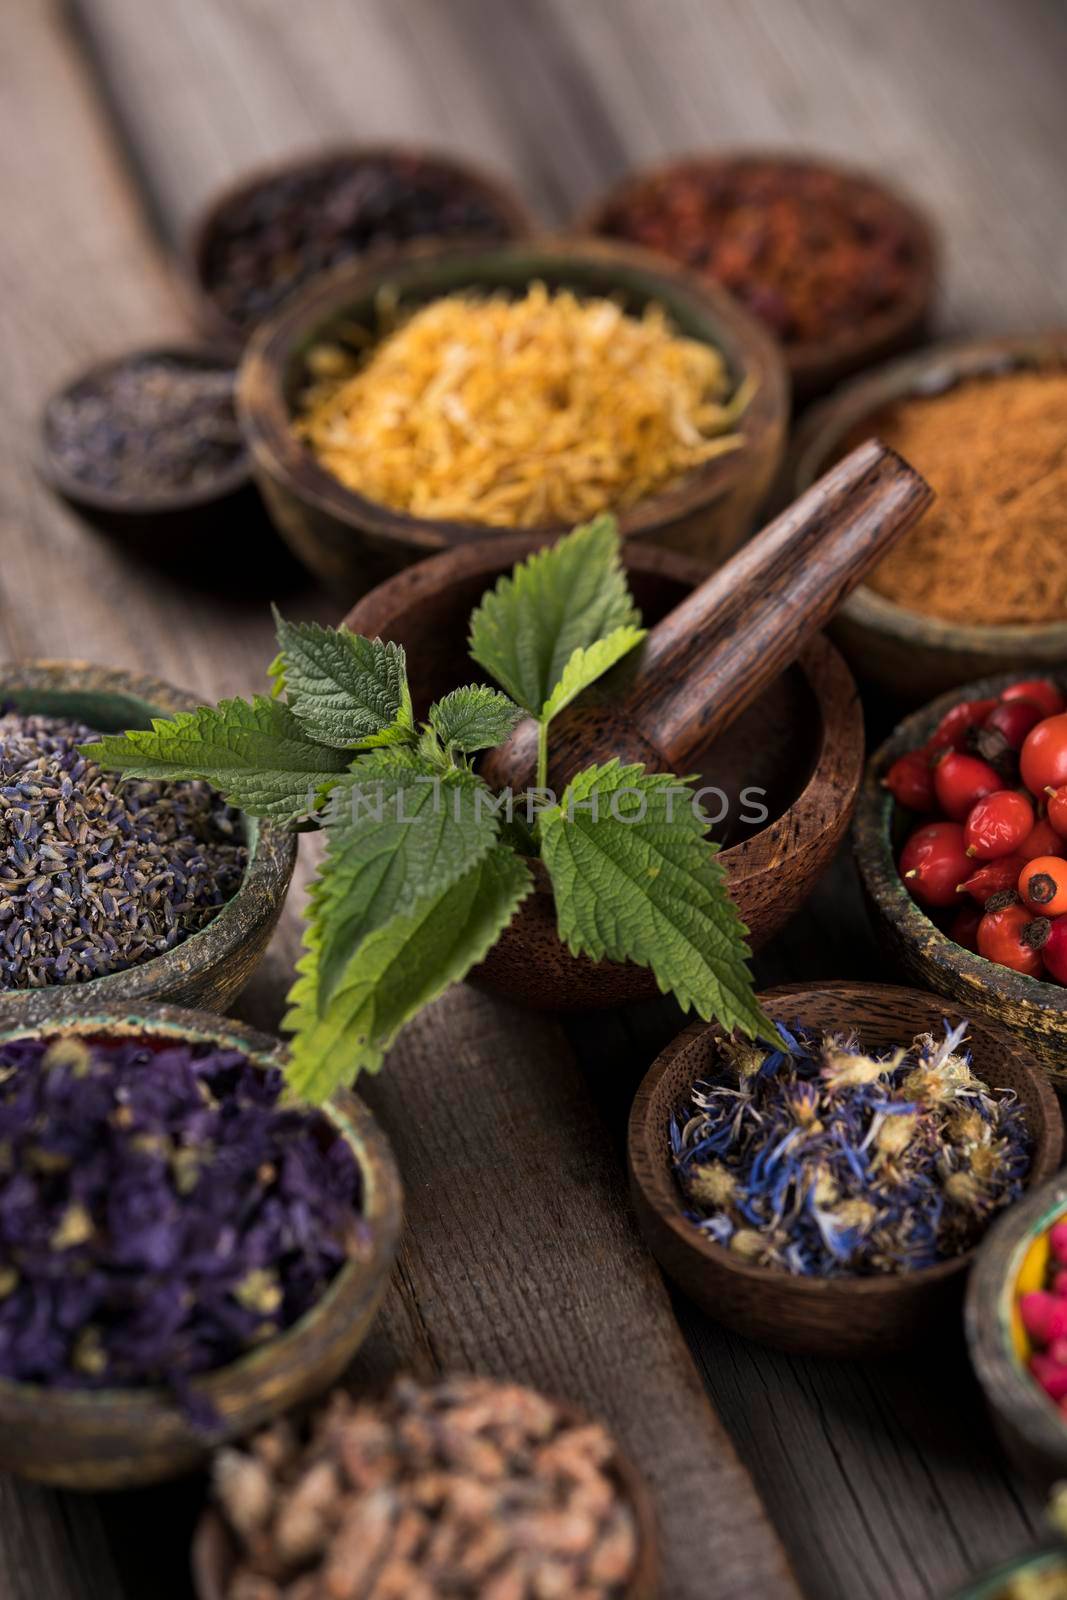 Natural remedy and wooden table background by JanPietruszka